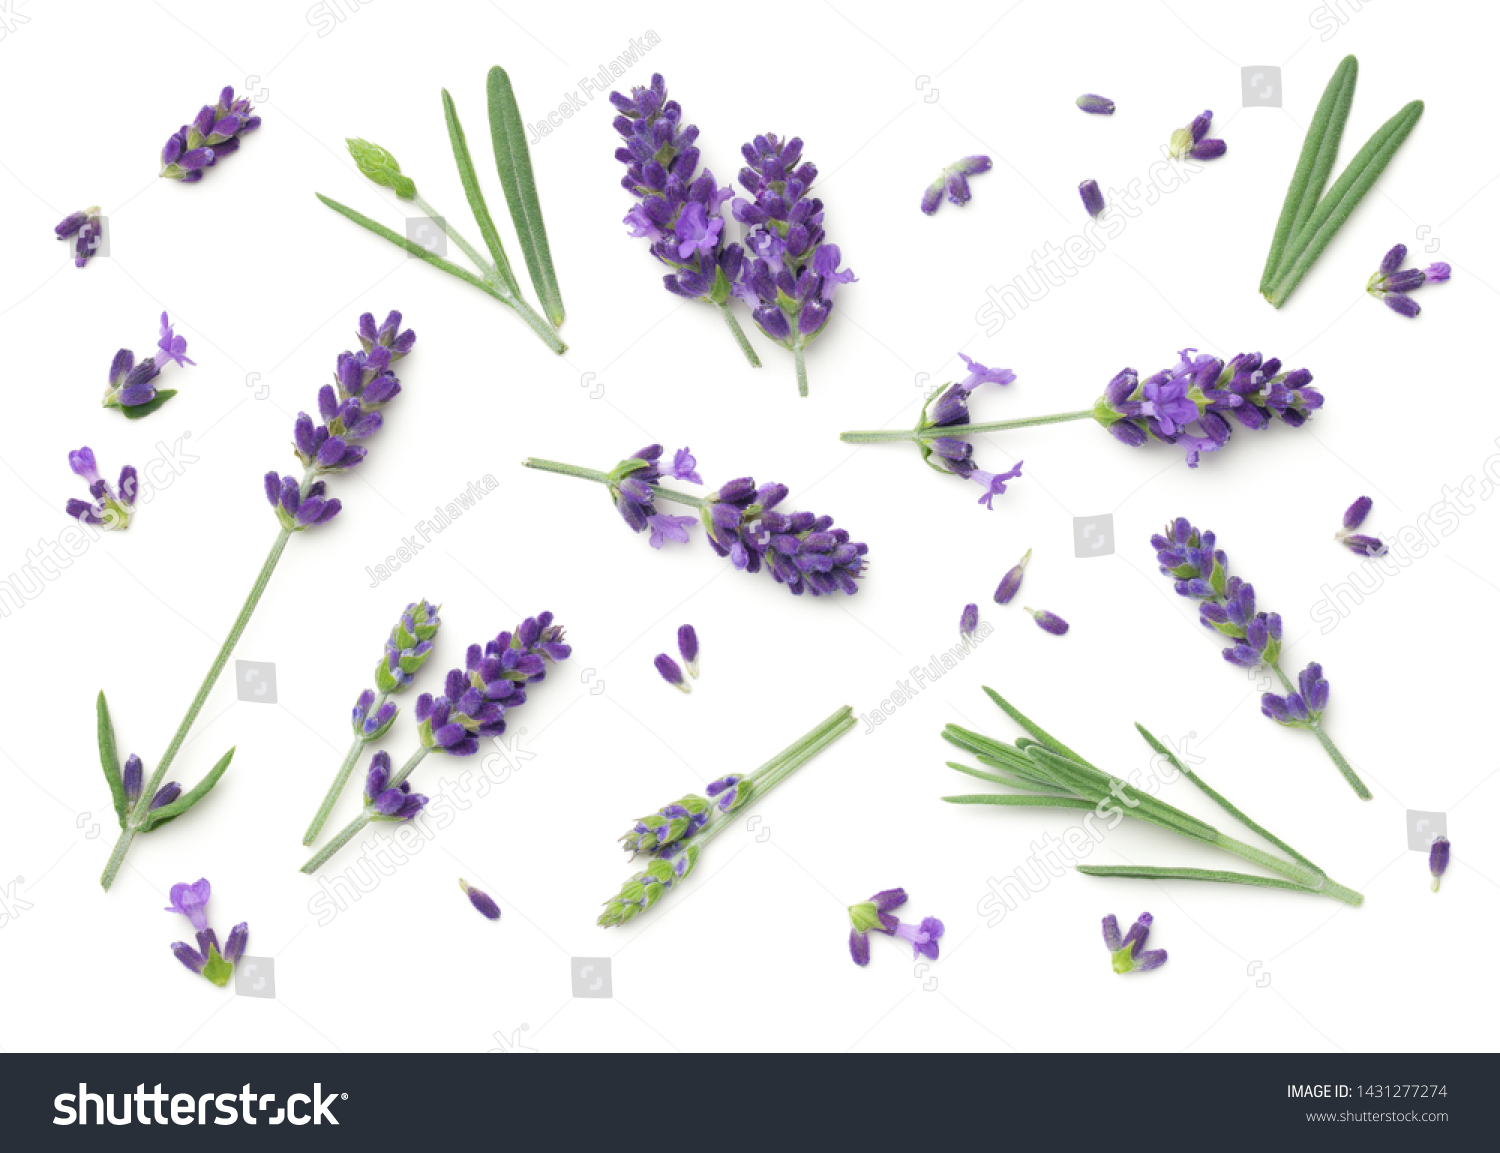 Lavender flowers isolated on white background. Top view, flat lay #1431277274